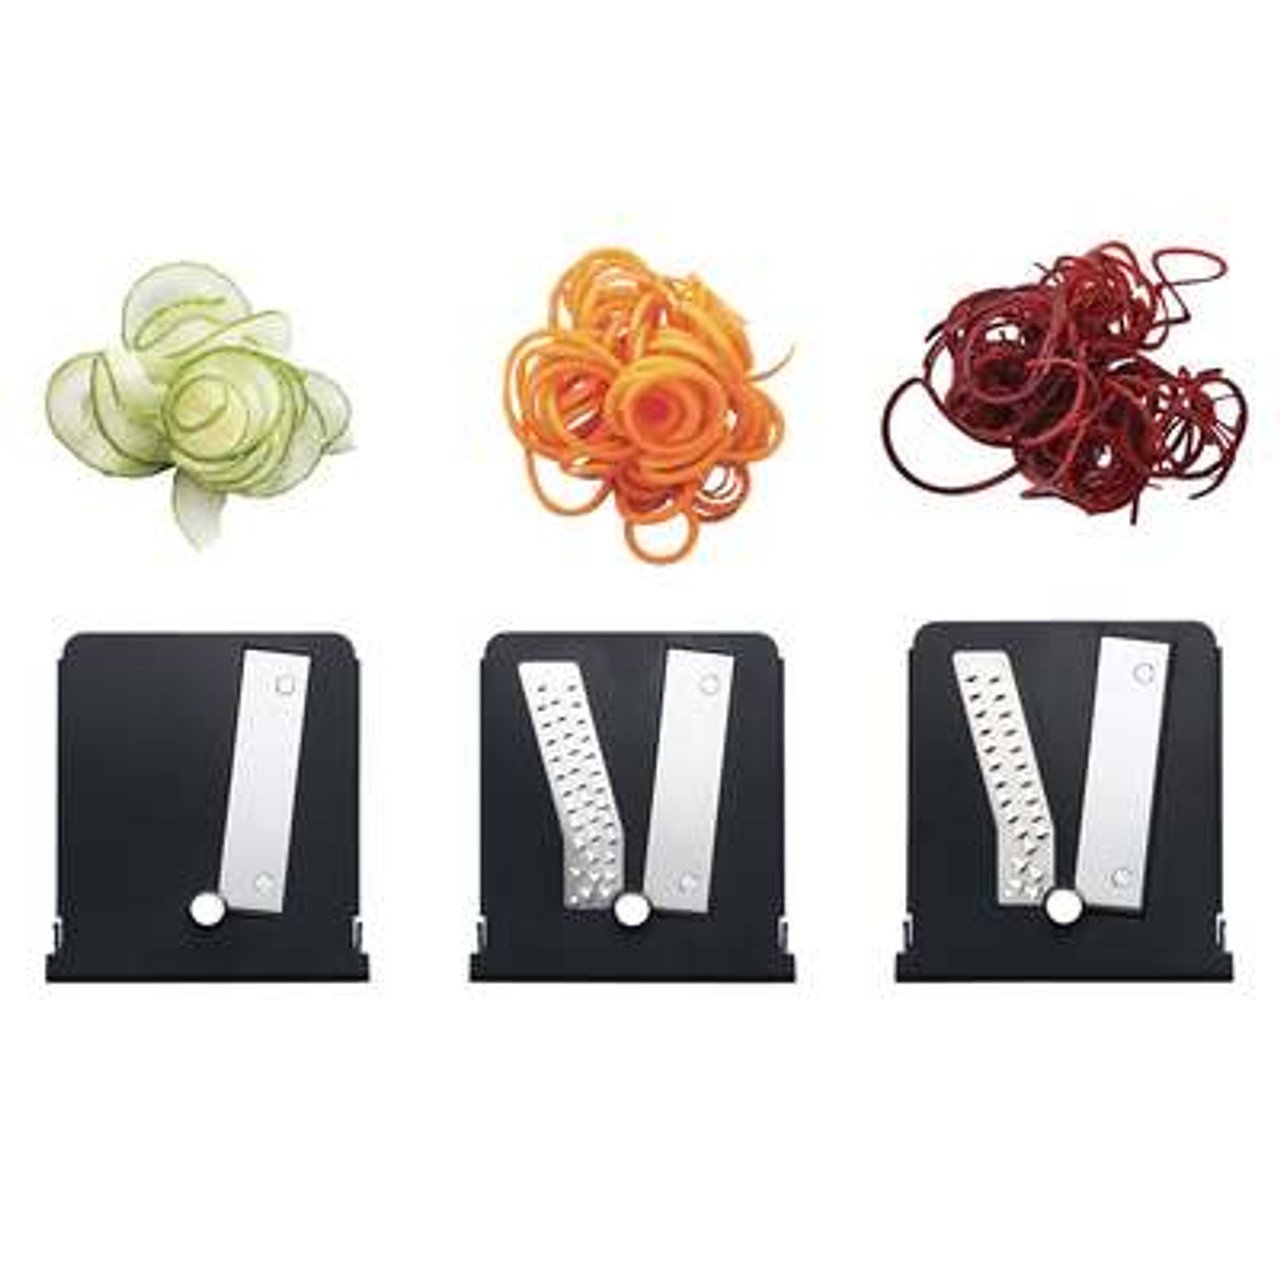 Three interchangeable blades to create ribbons and noodle cuts